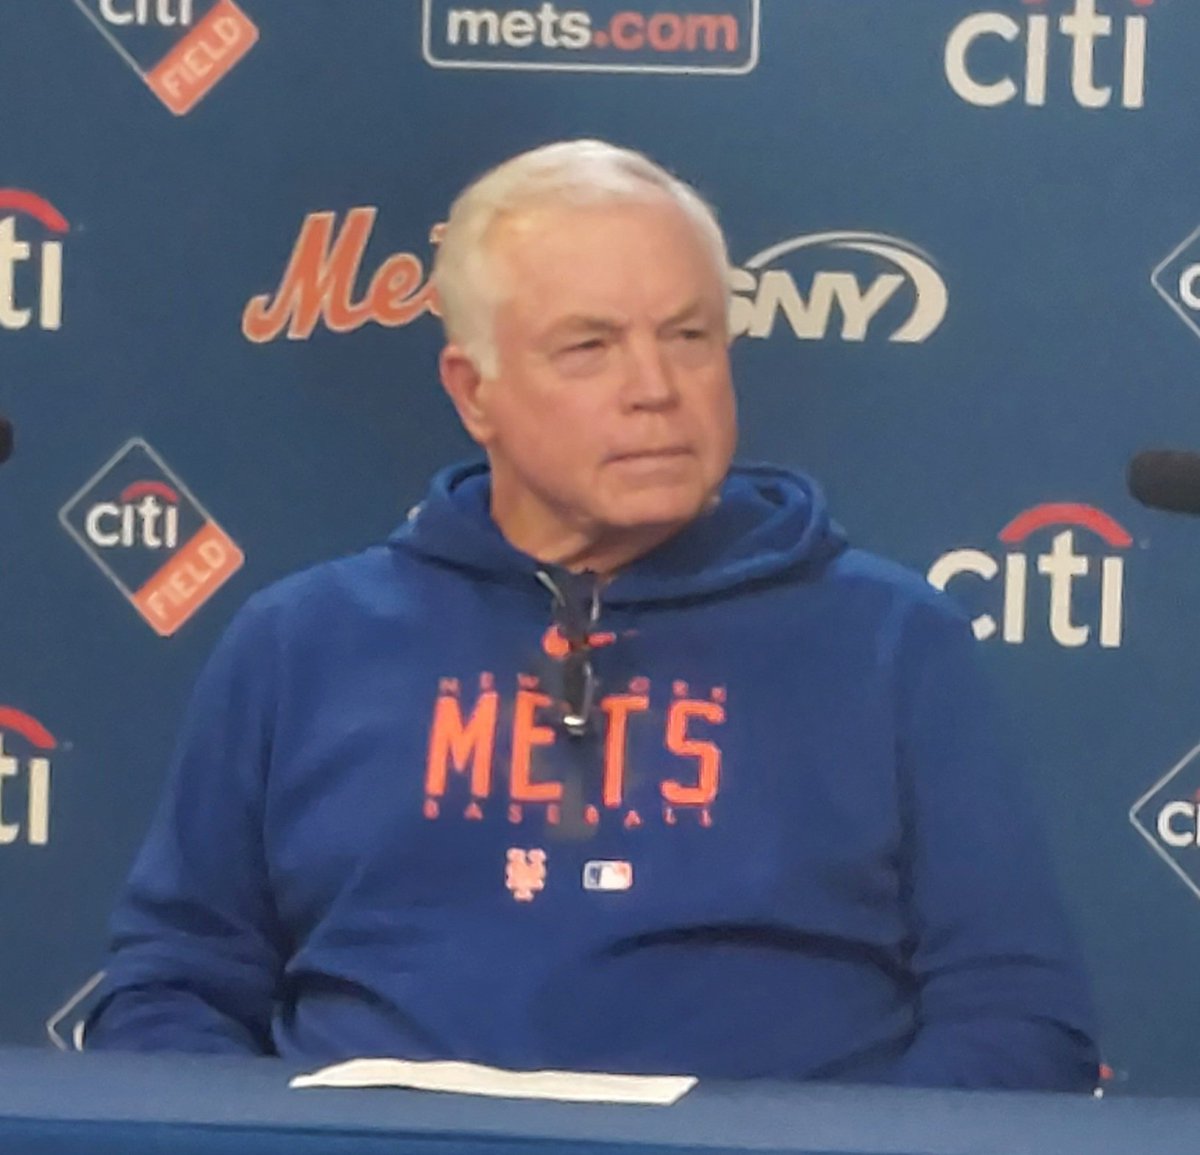 Buck deserved a better 2023. The again, so did we all. #LGM